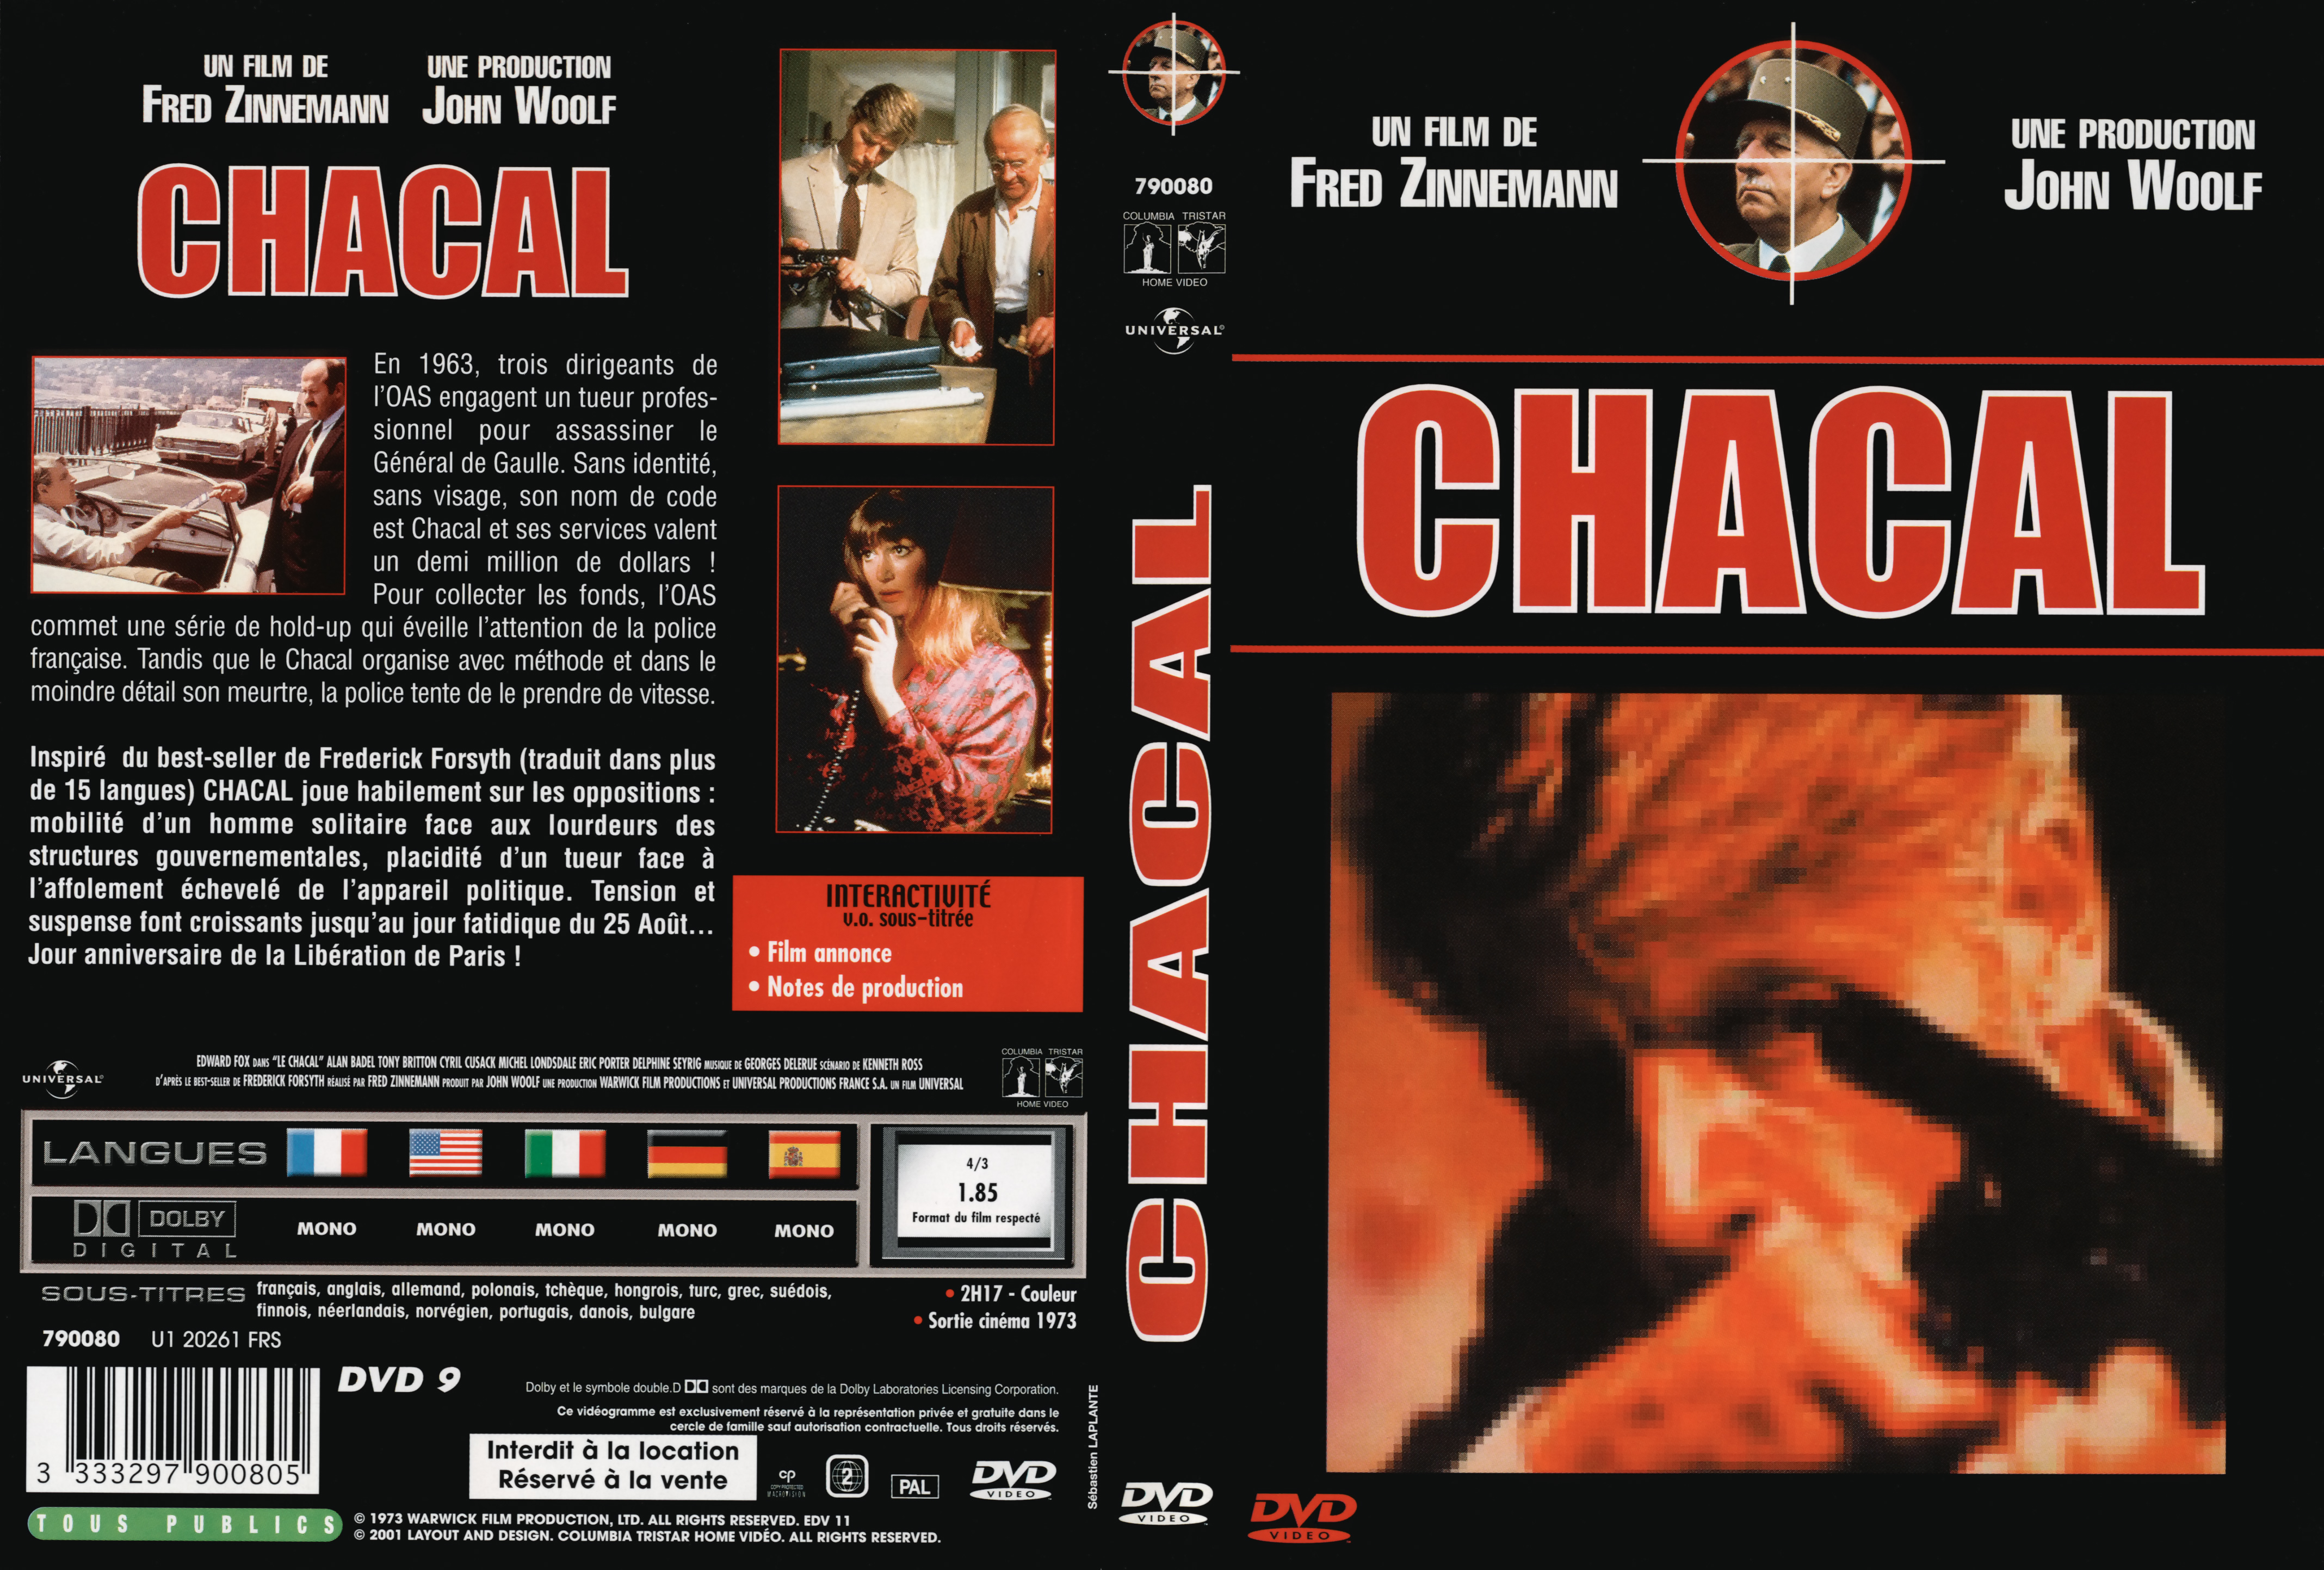 Jaquette DVD Chacal